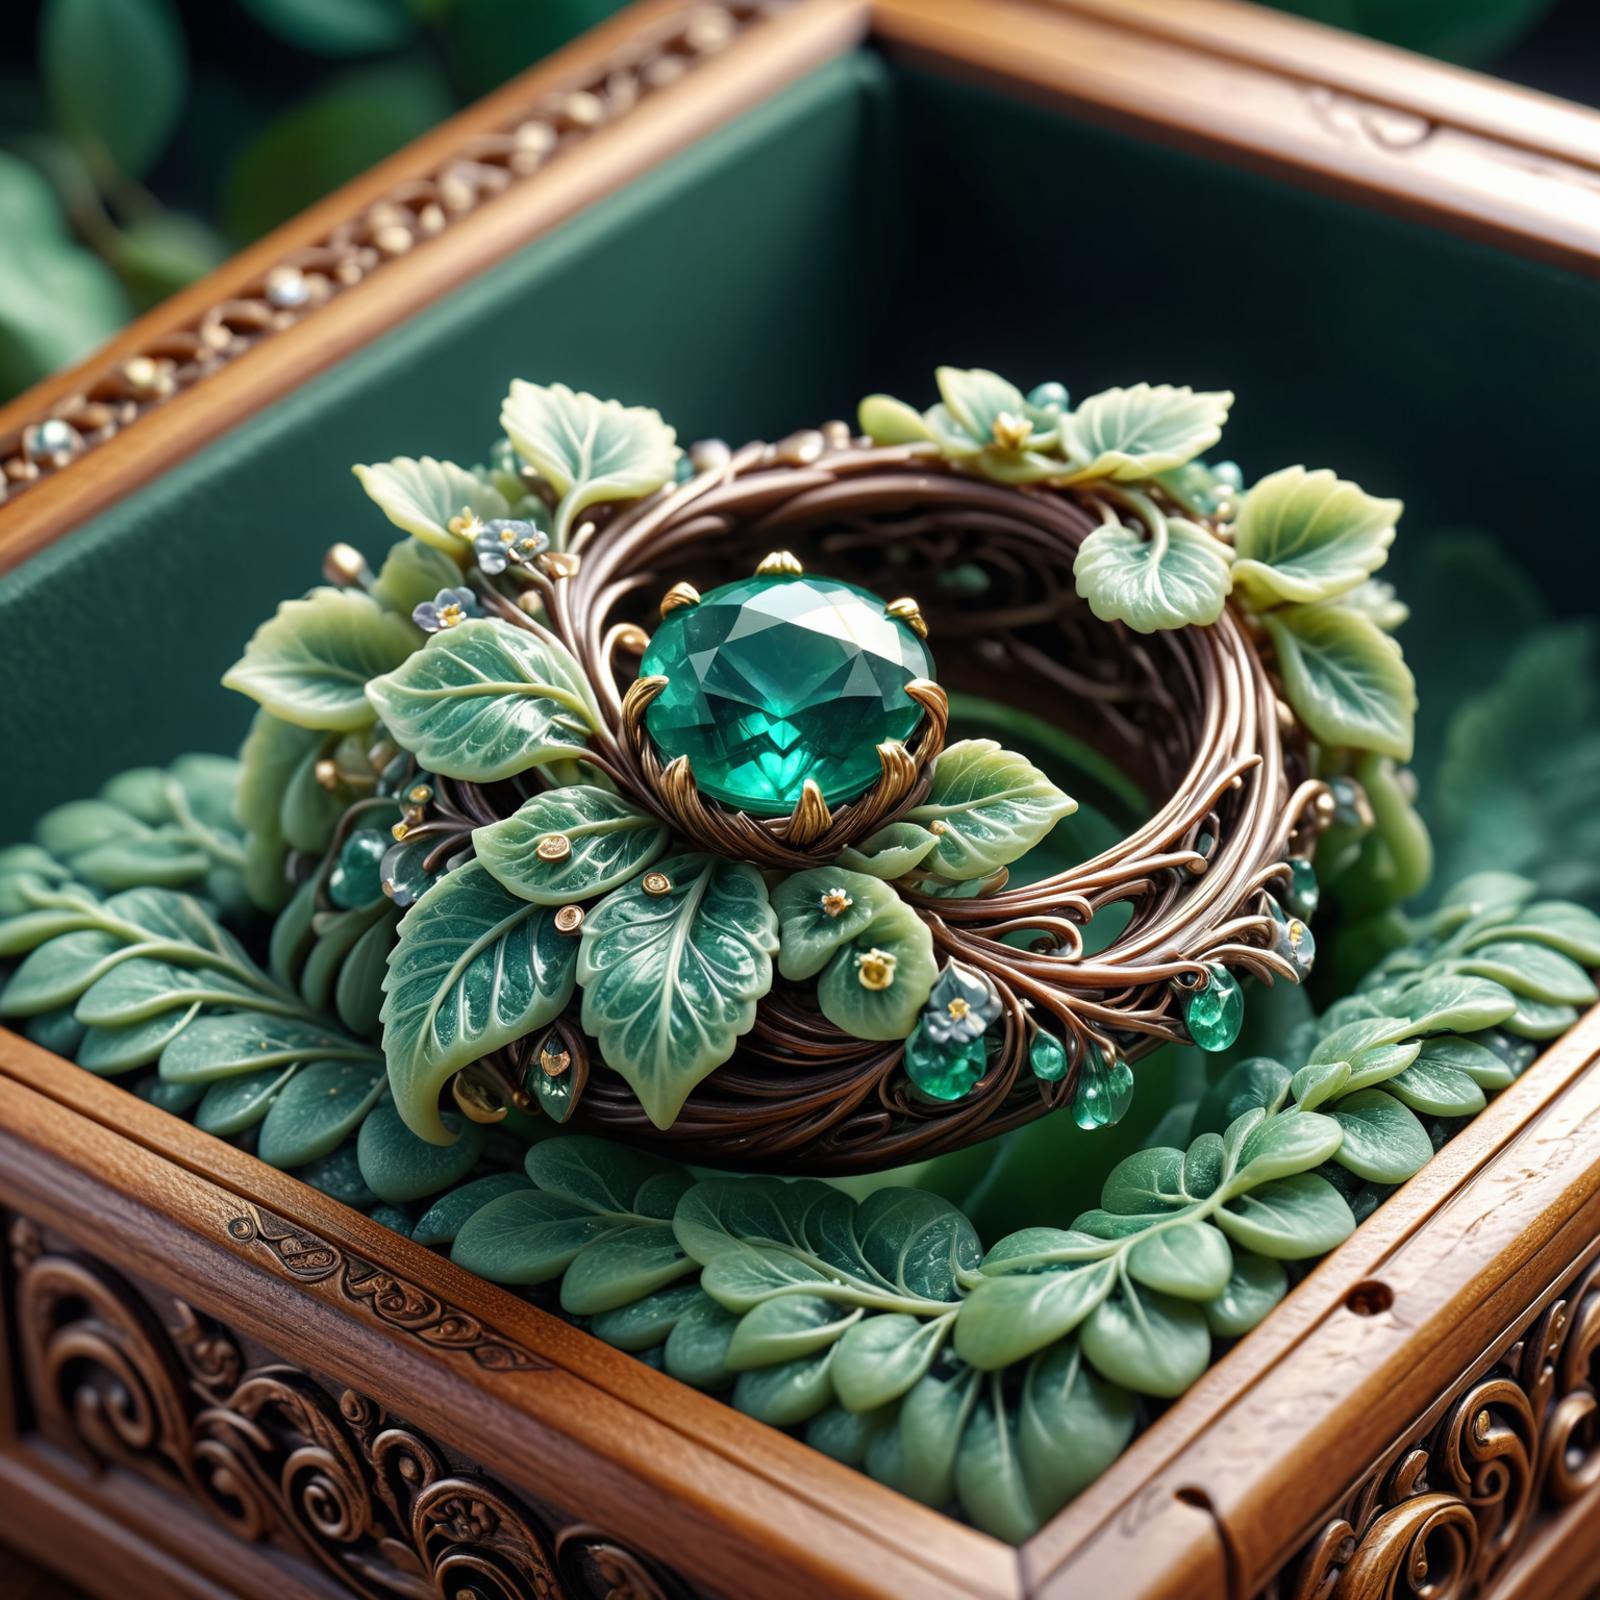 A green ring with leaves and a green gemstone on top of a green plant in a wooden box.